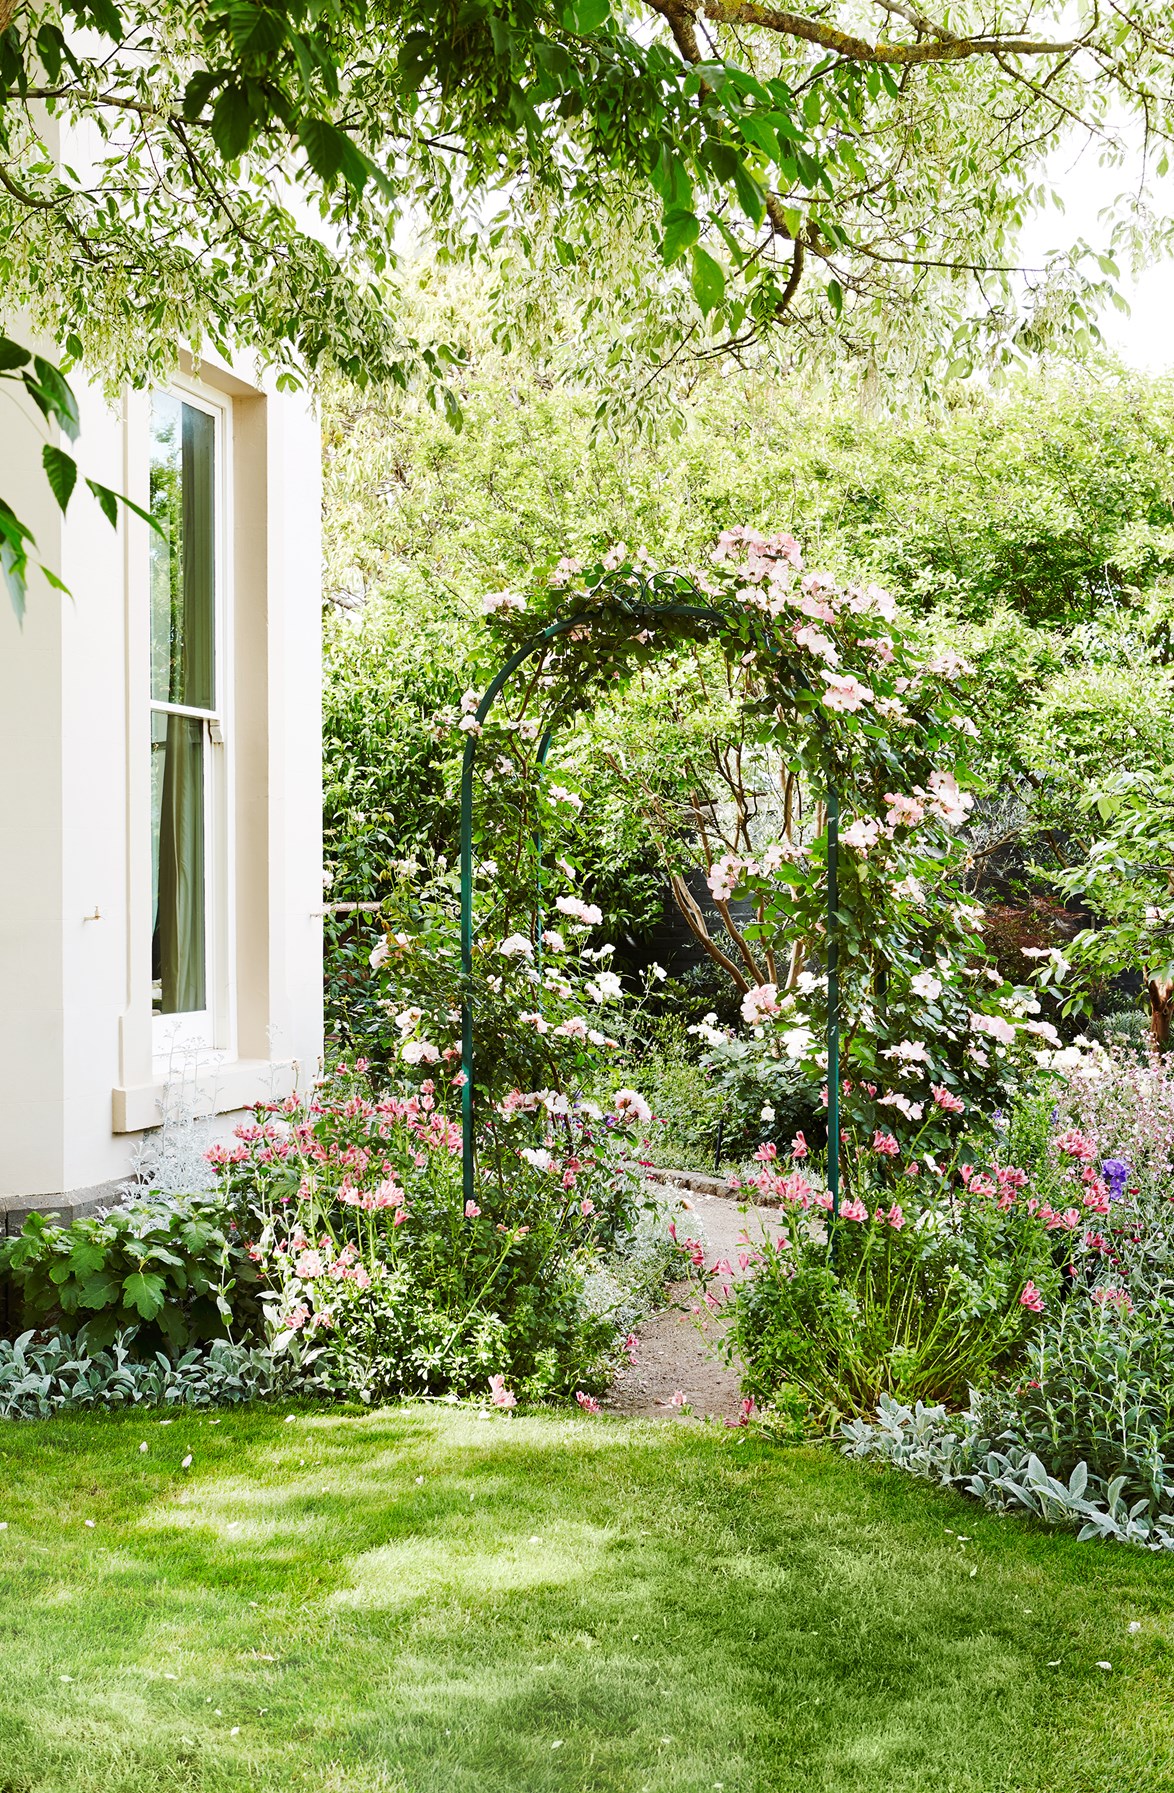 Thanks to its owners' three decades of dedication, this magnificent garden in Melbourne transcends the ages.